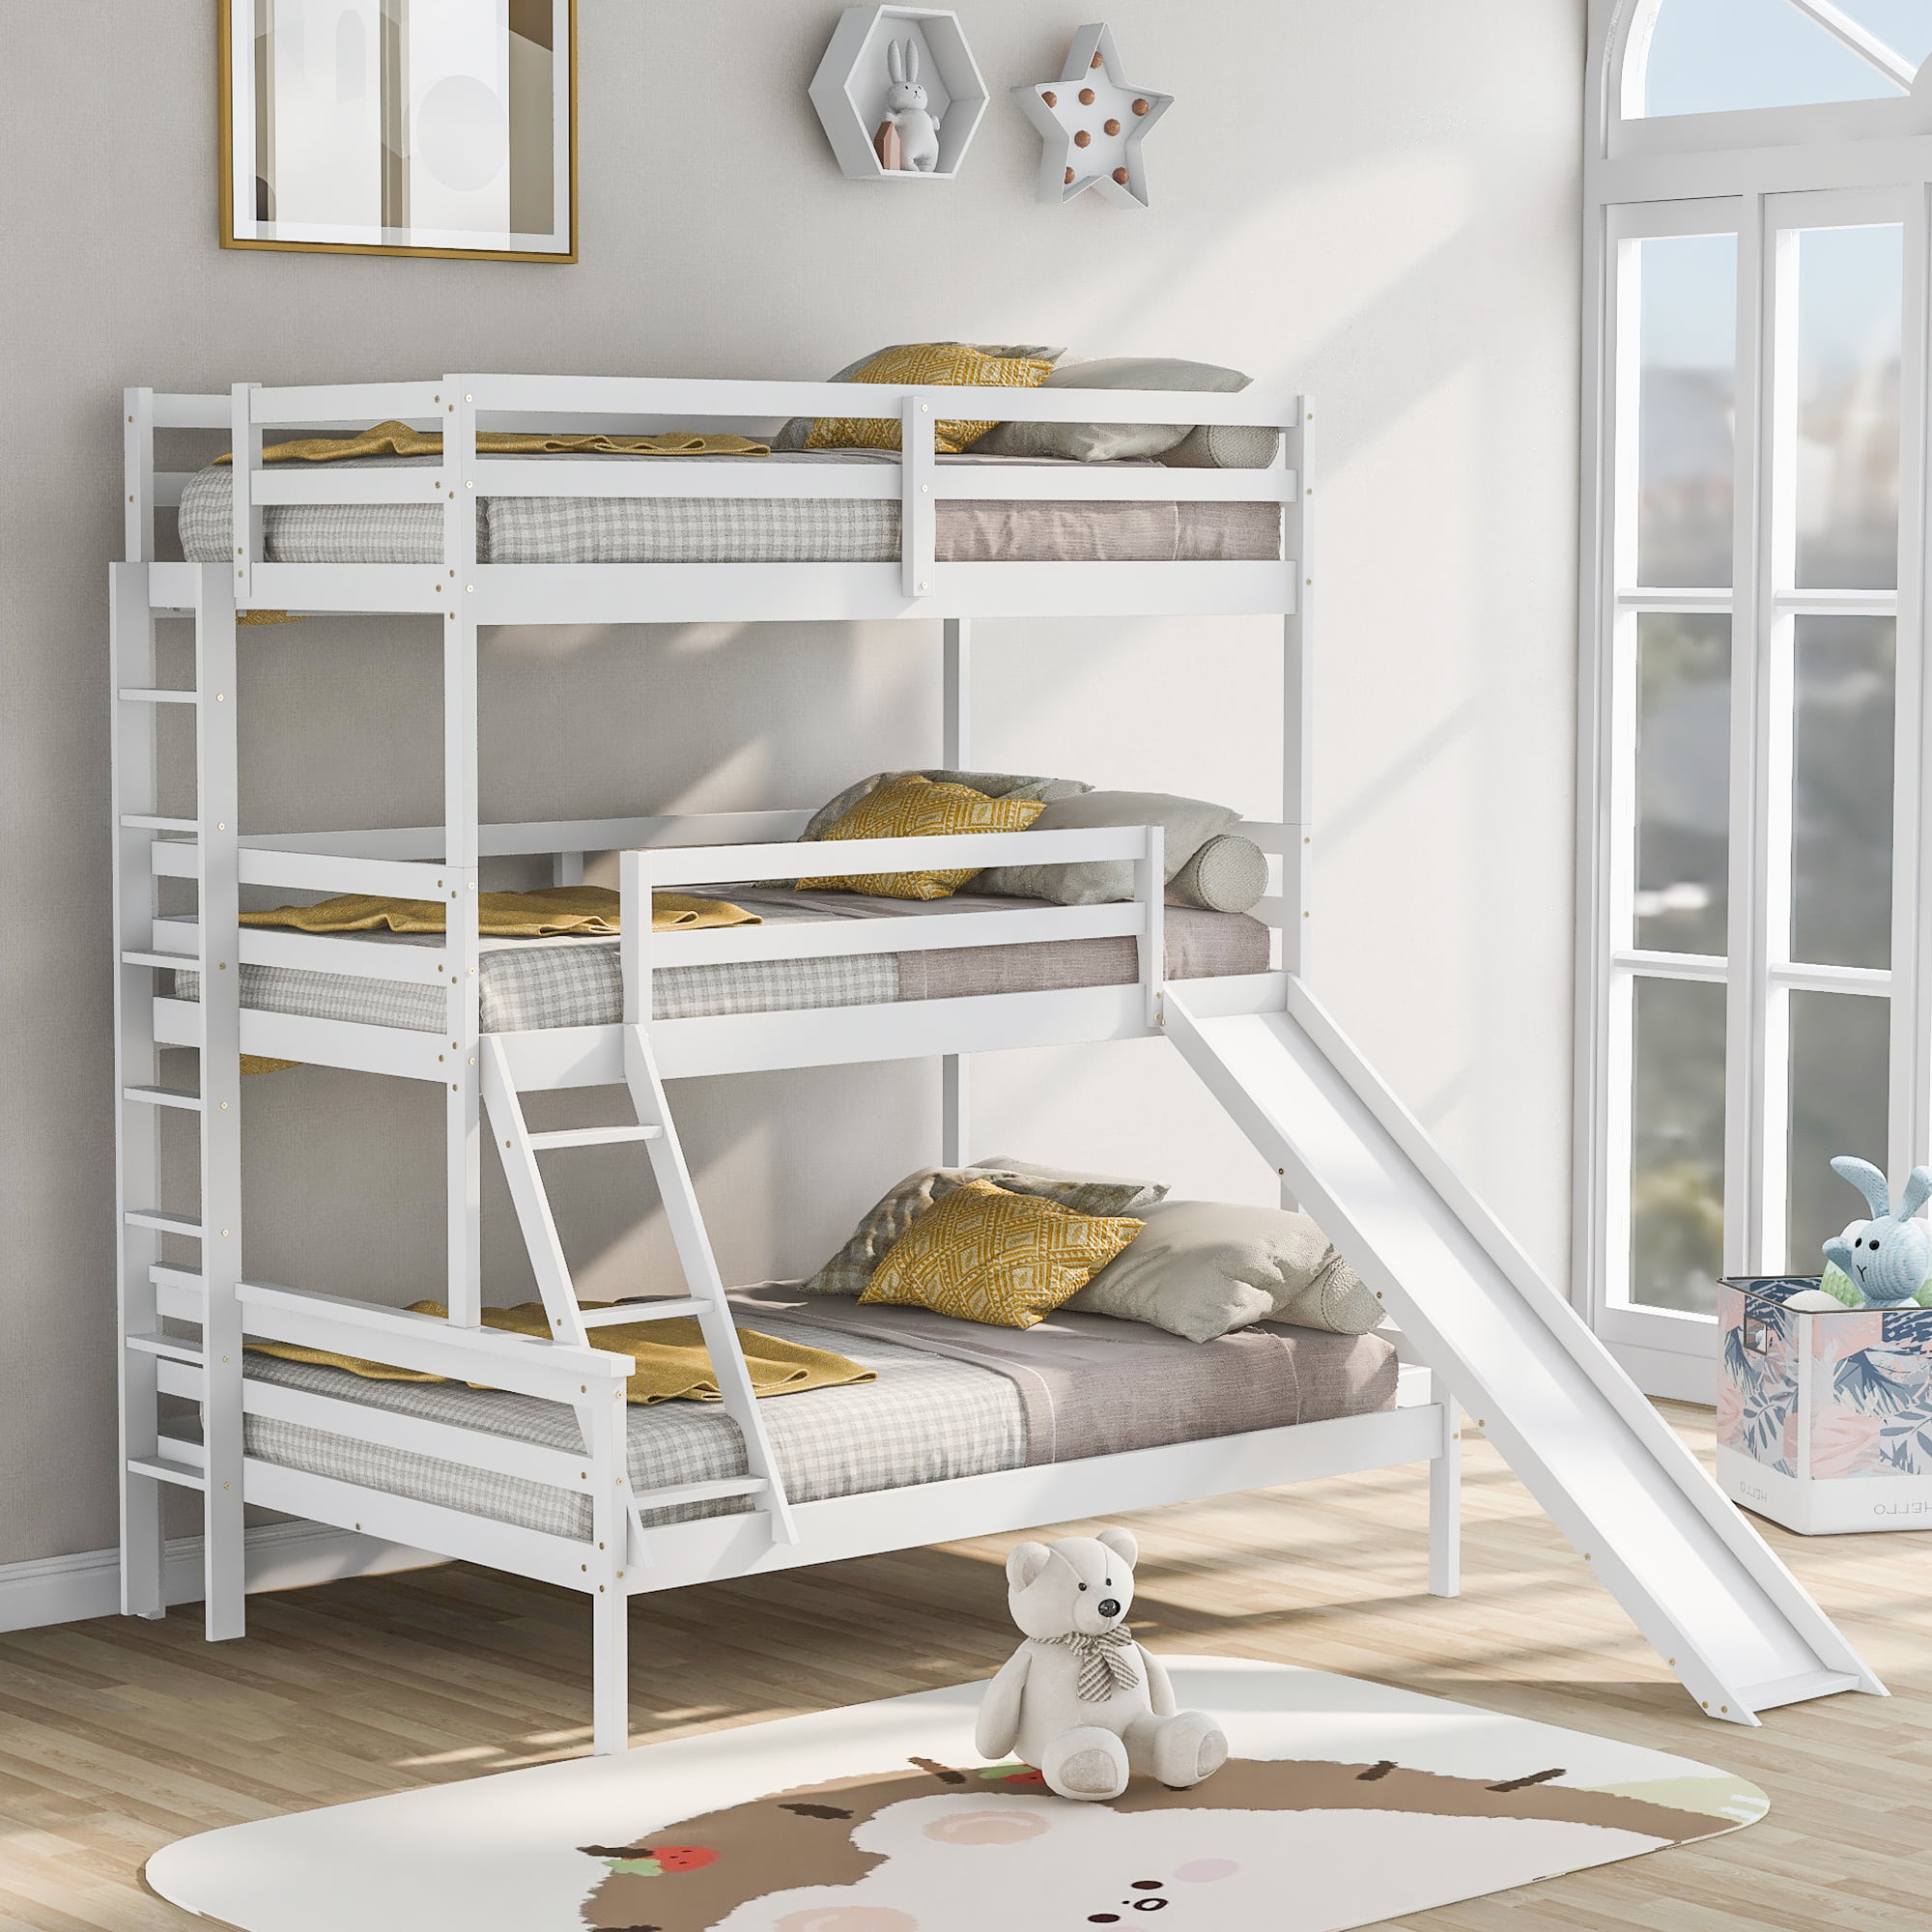 Heavy Duty 3ft single wooden high sleeper bunkbed Loft Bunk Bed CAN BE USED 